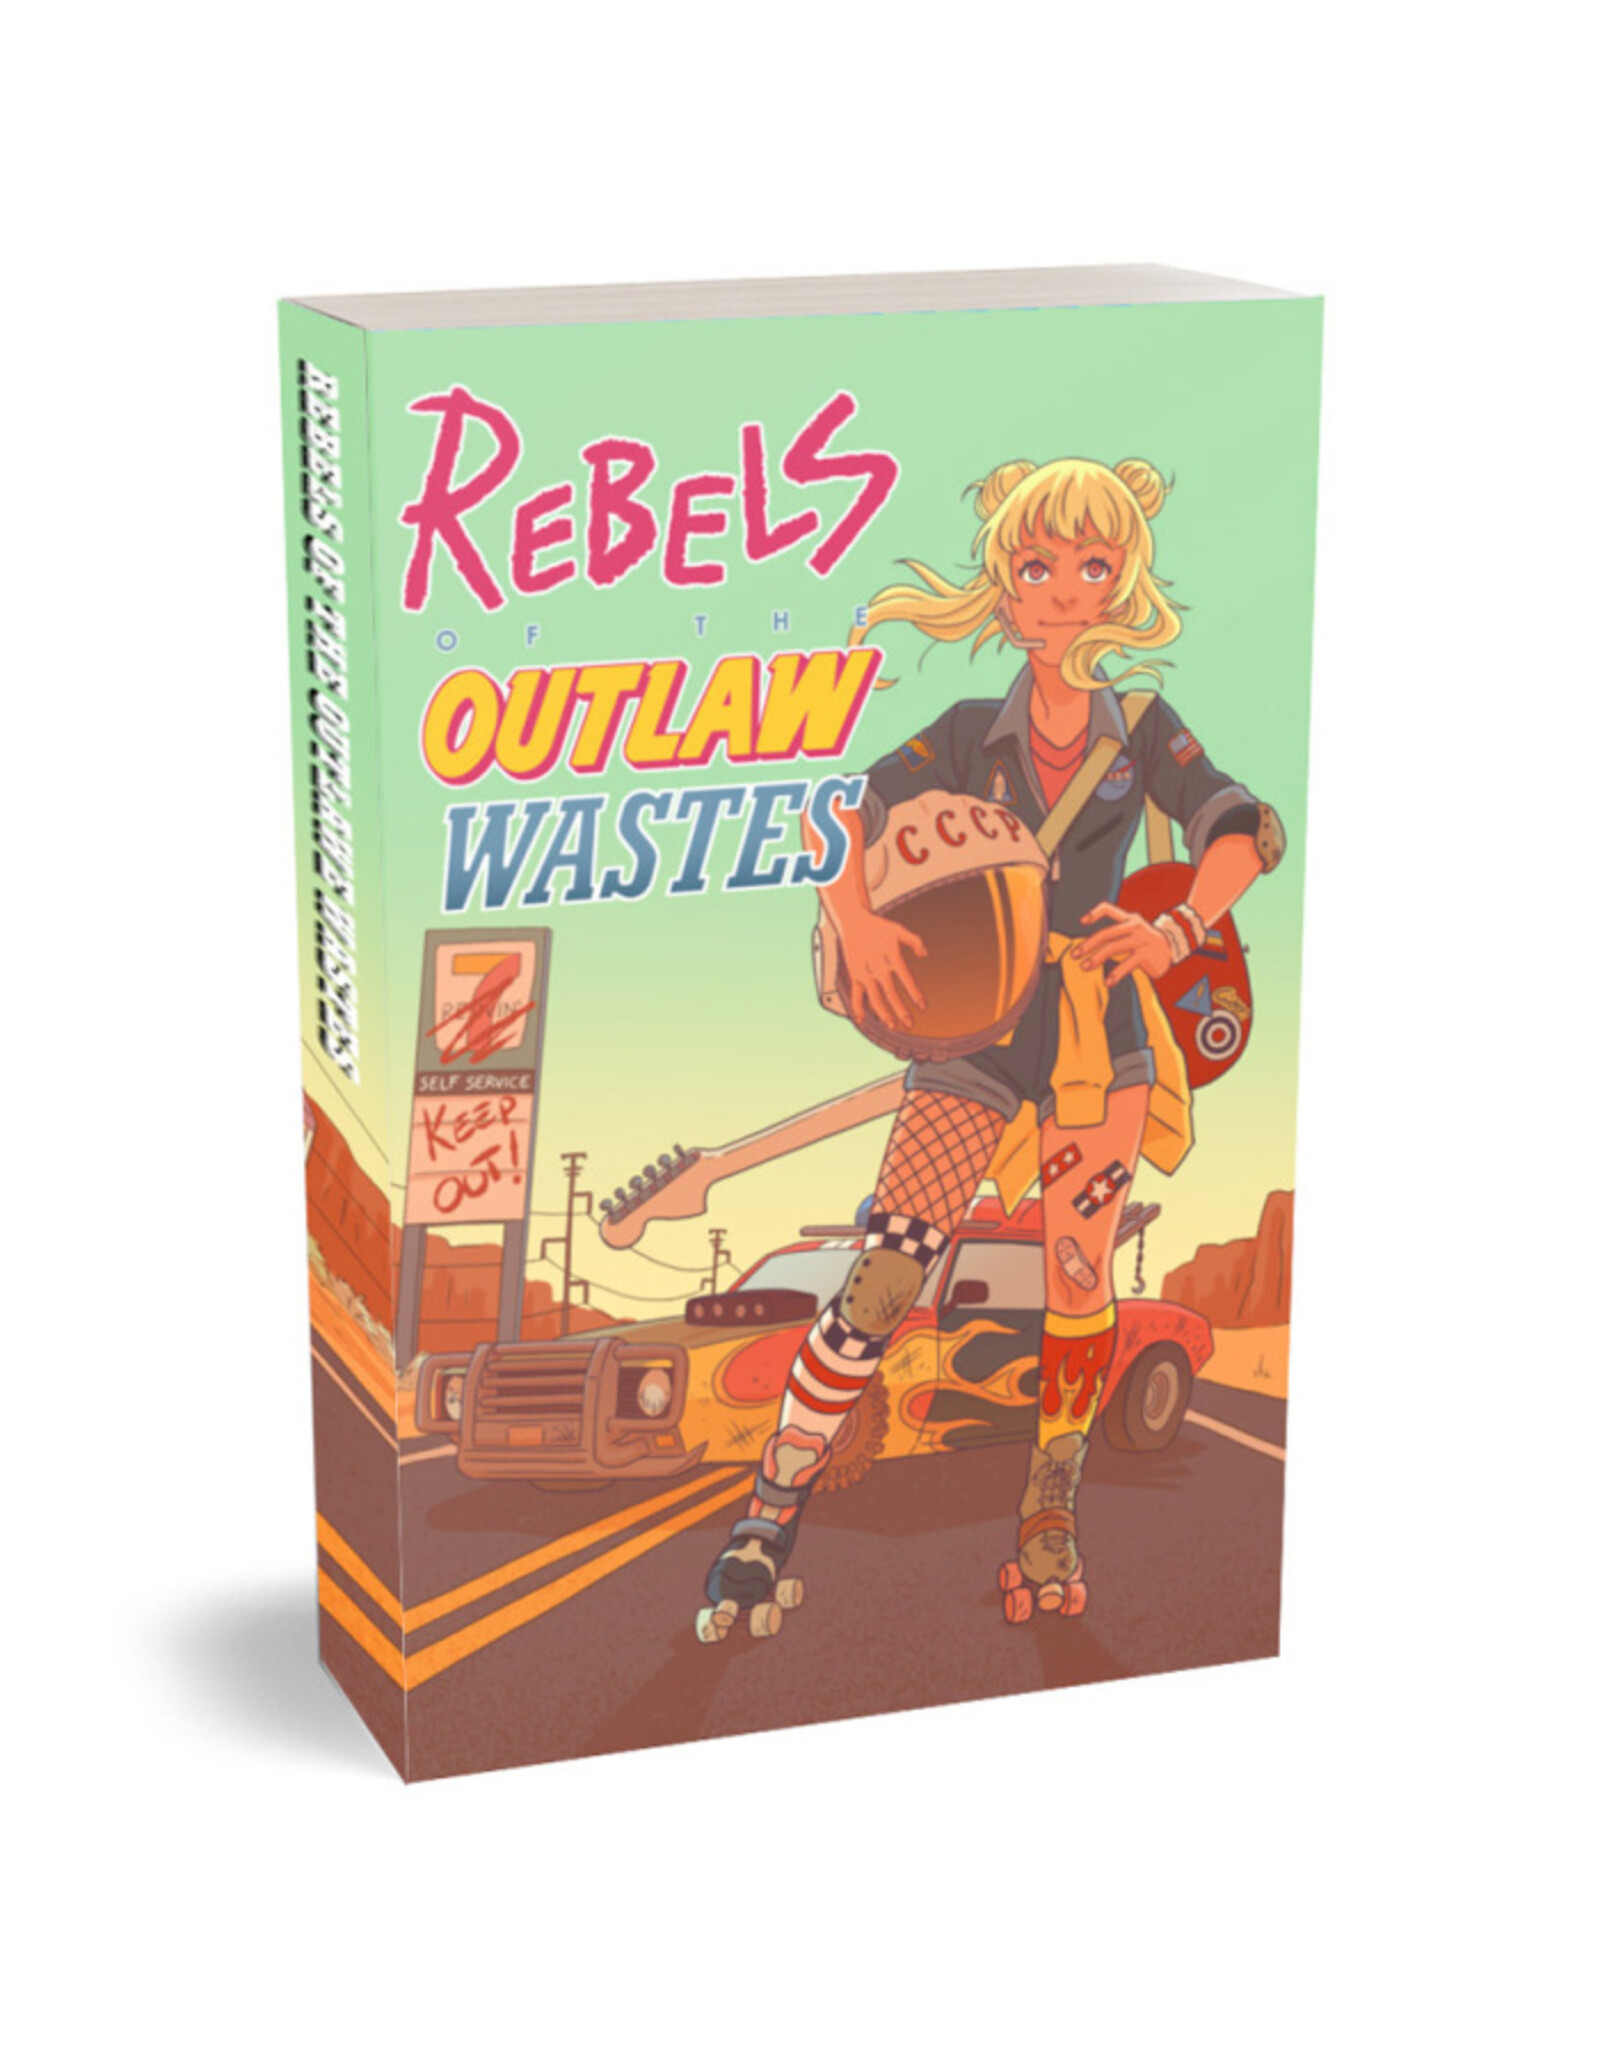 Rebels of the Outlaw Wastes